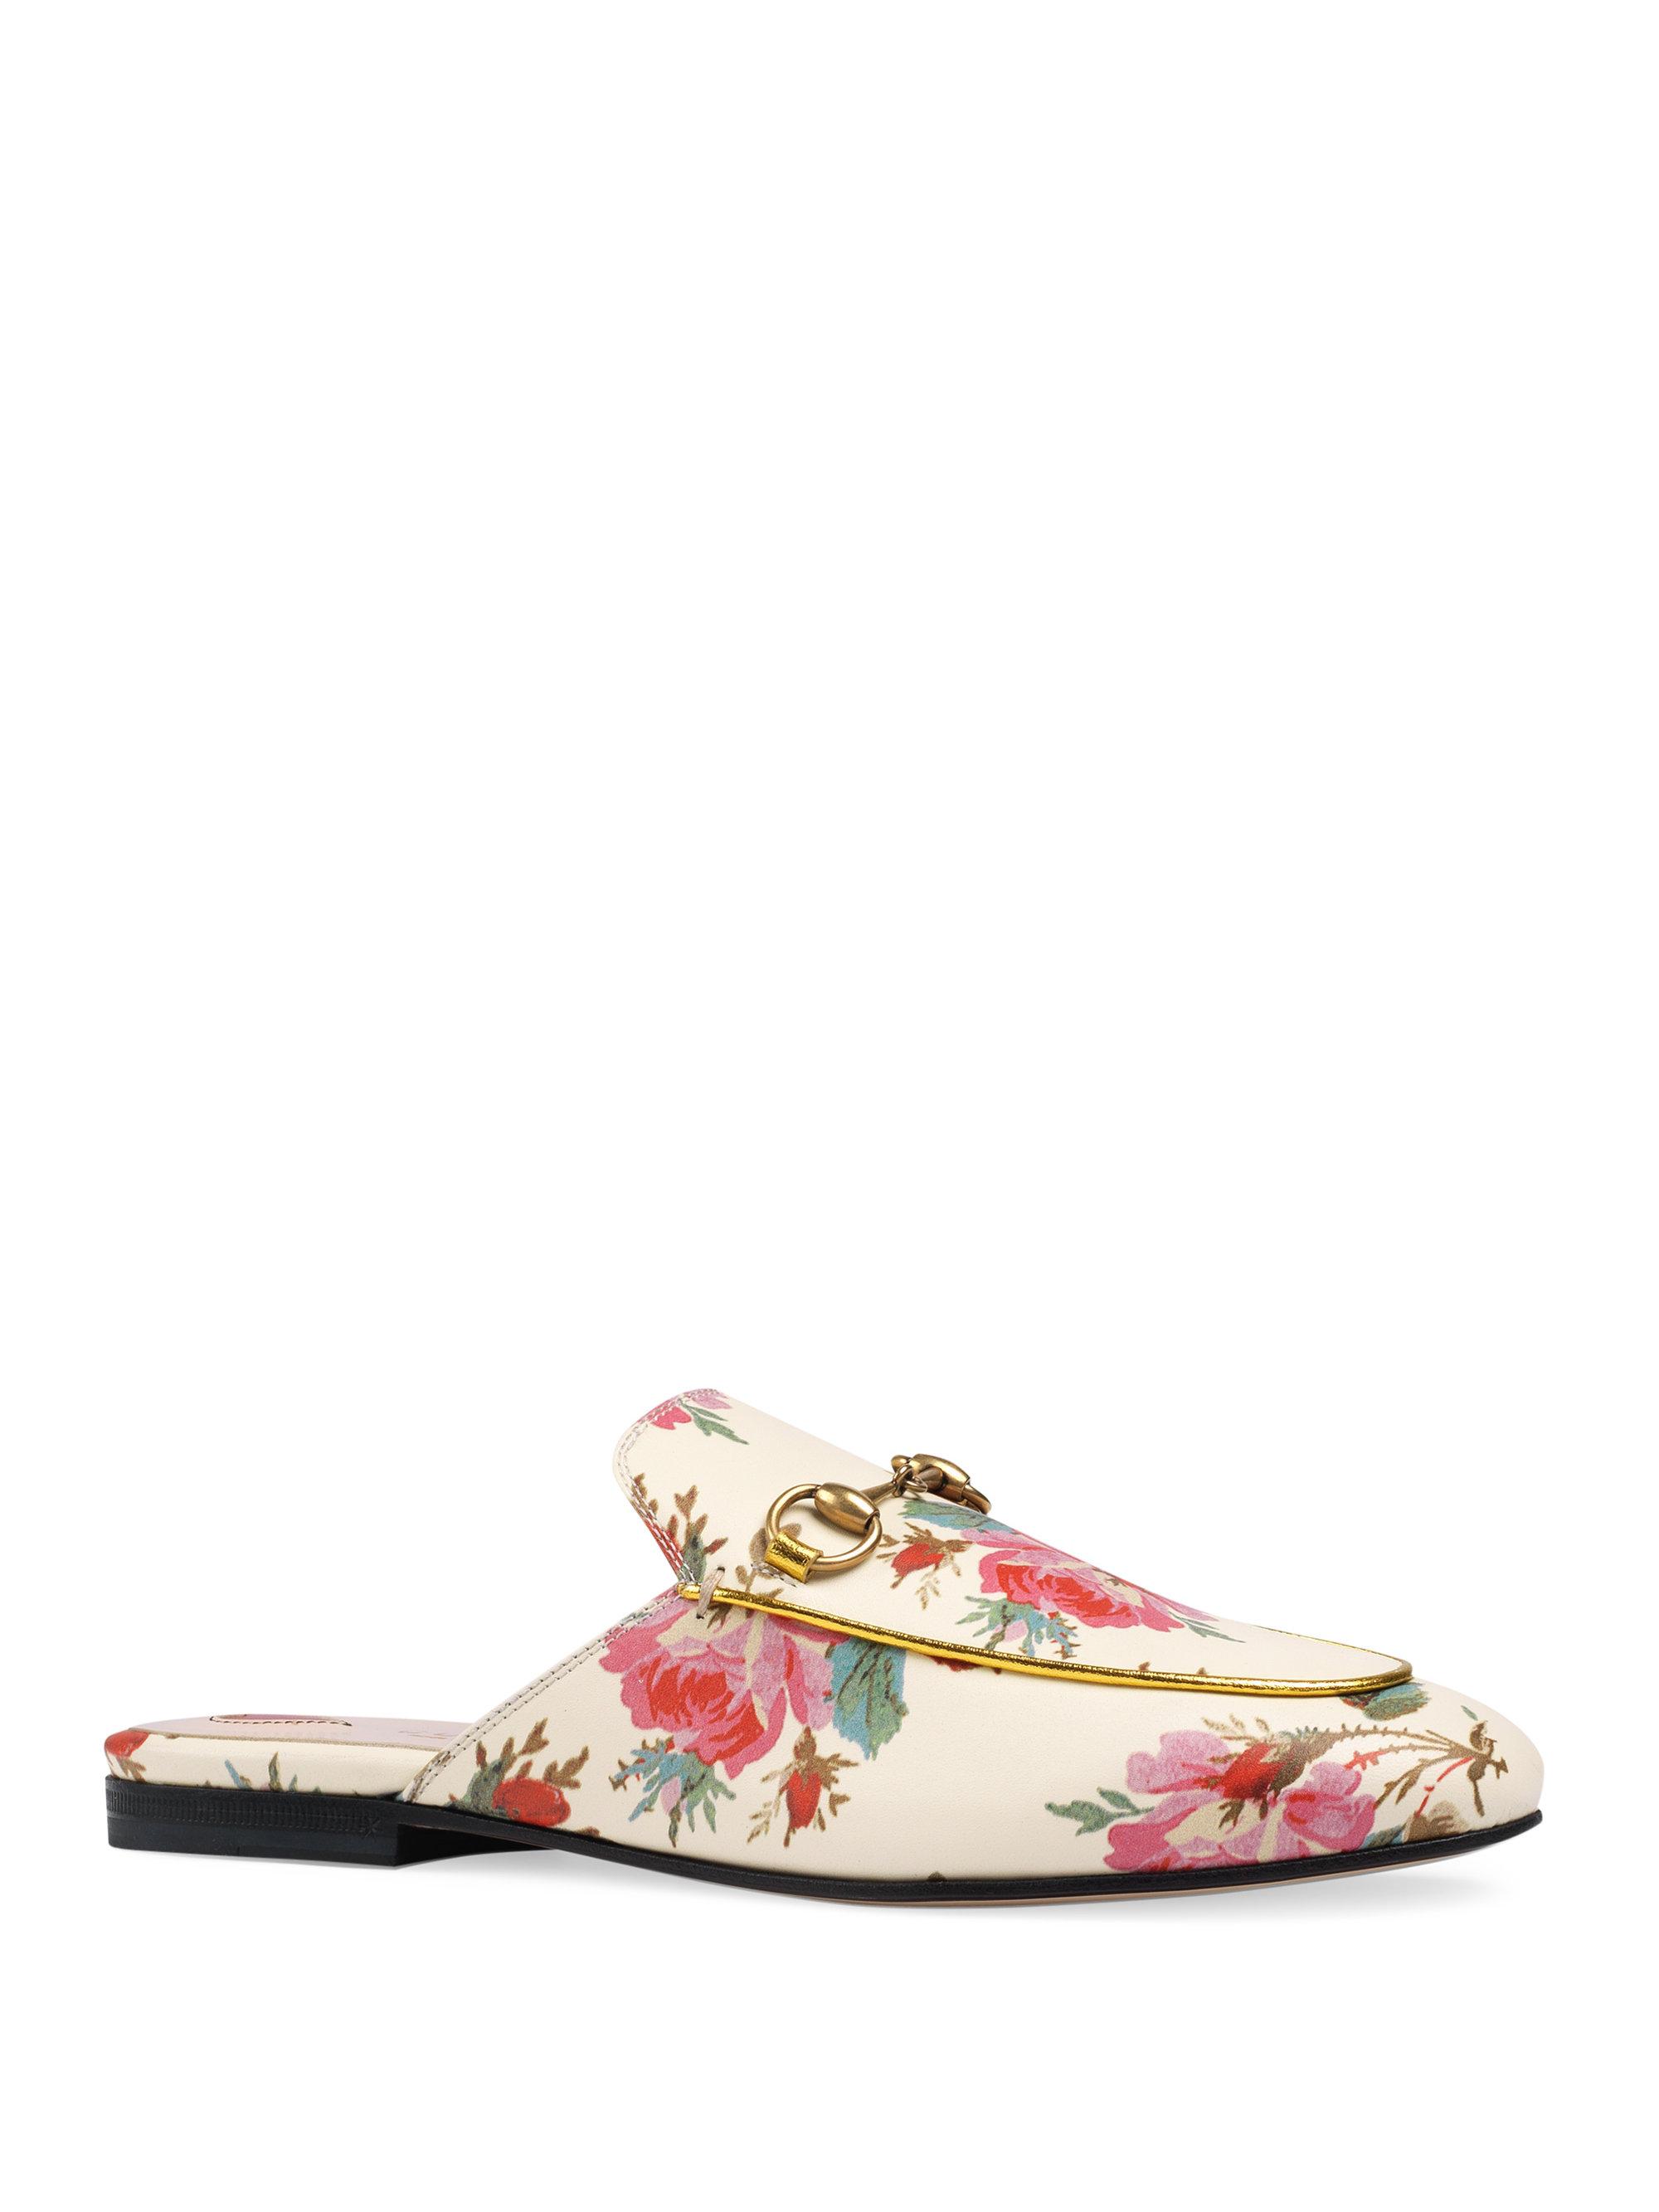 Lyst - Gucci Princetown Floral Slides in White